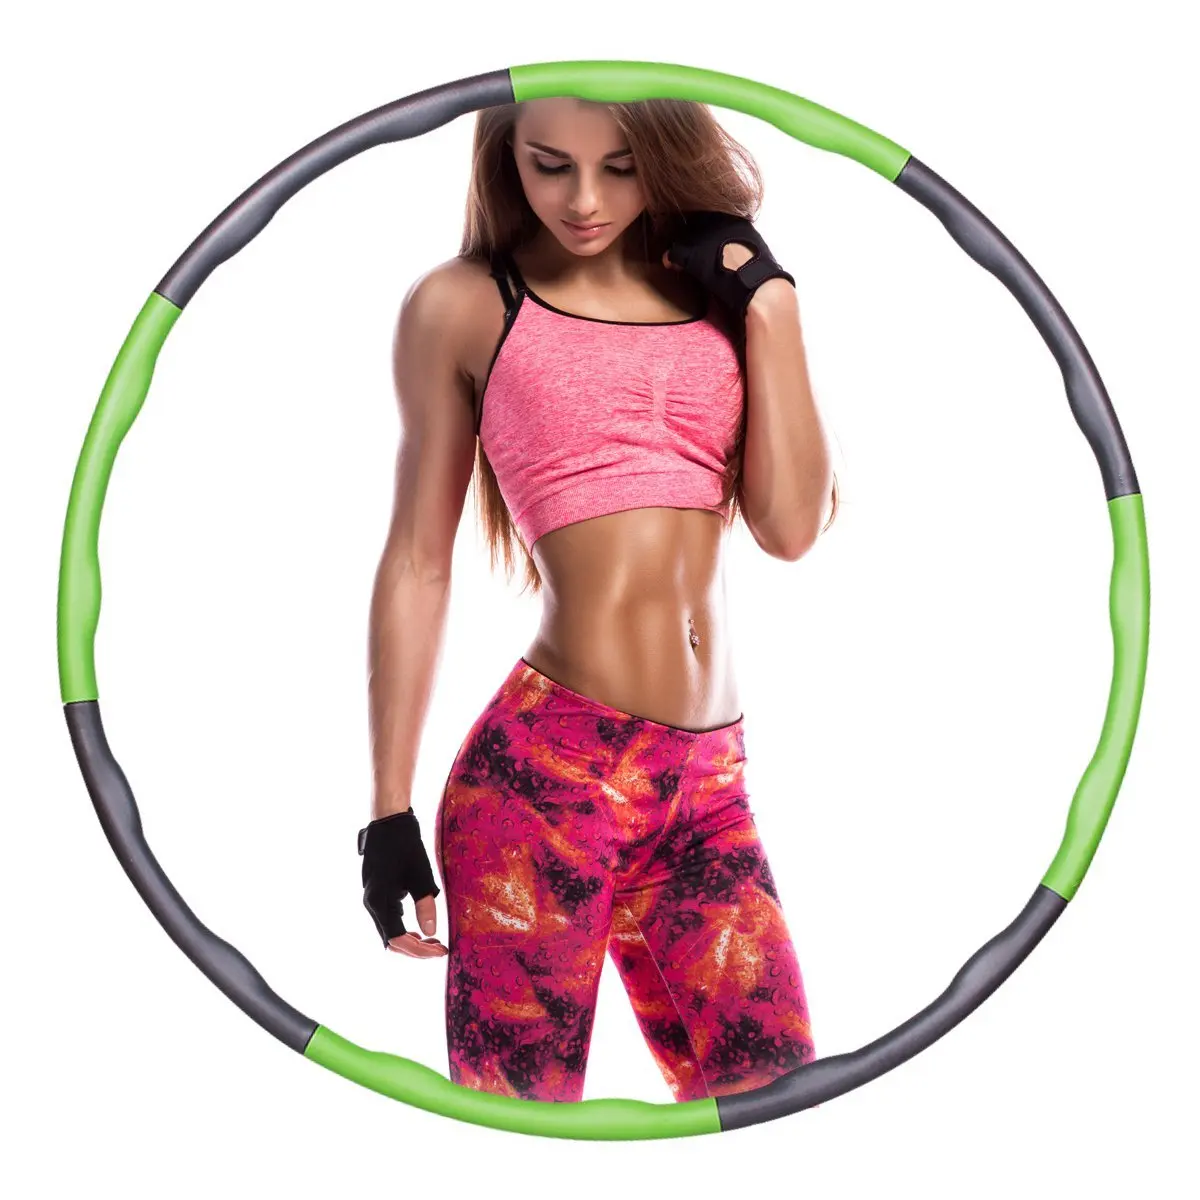 Cheap 5 Lb Weighted Hula Hoop, find 5 